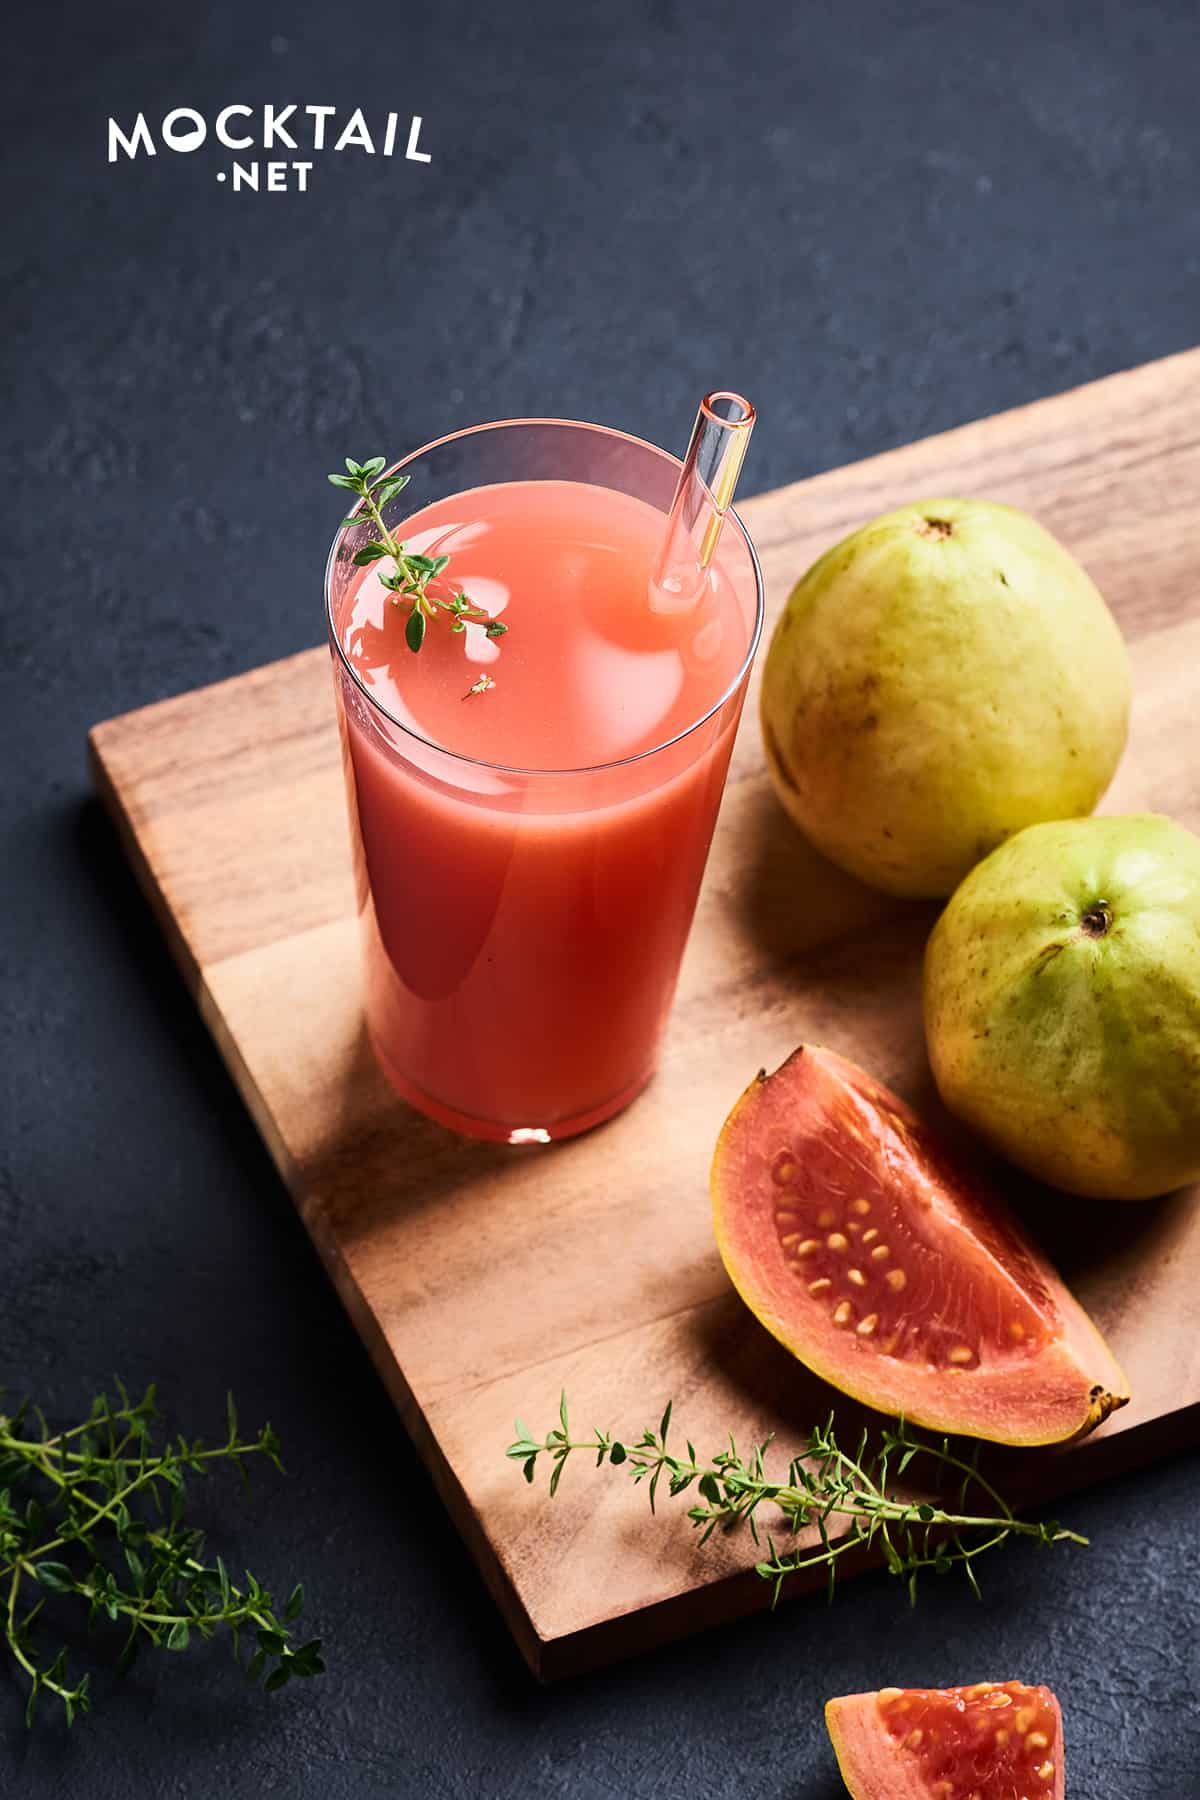 Tips and Tricks to Make Guava Juice